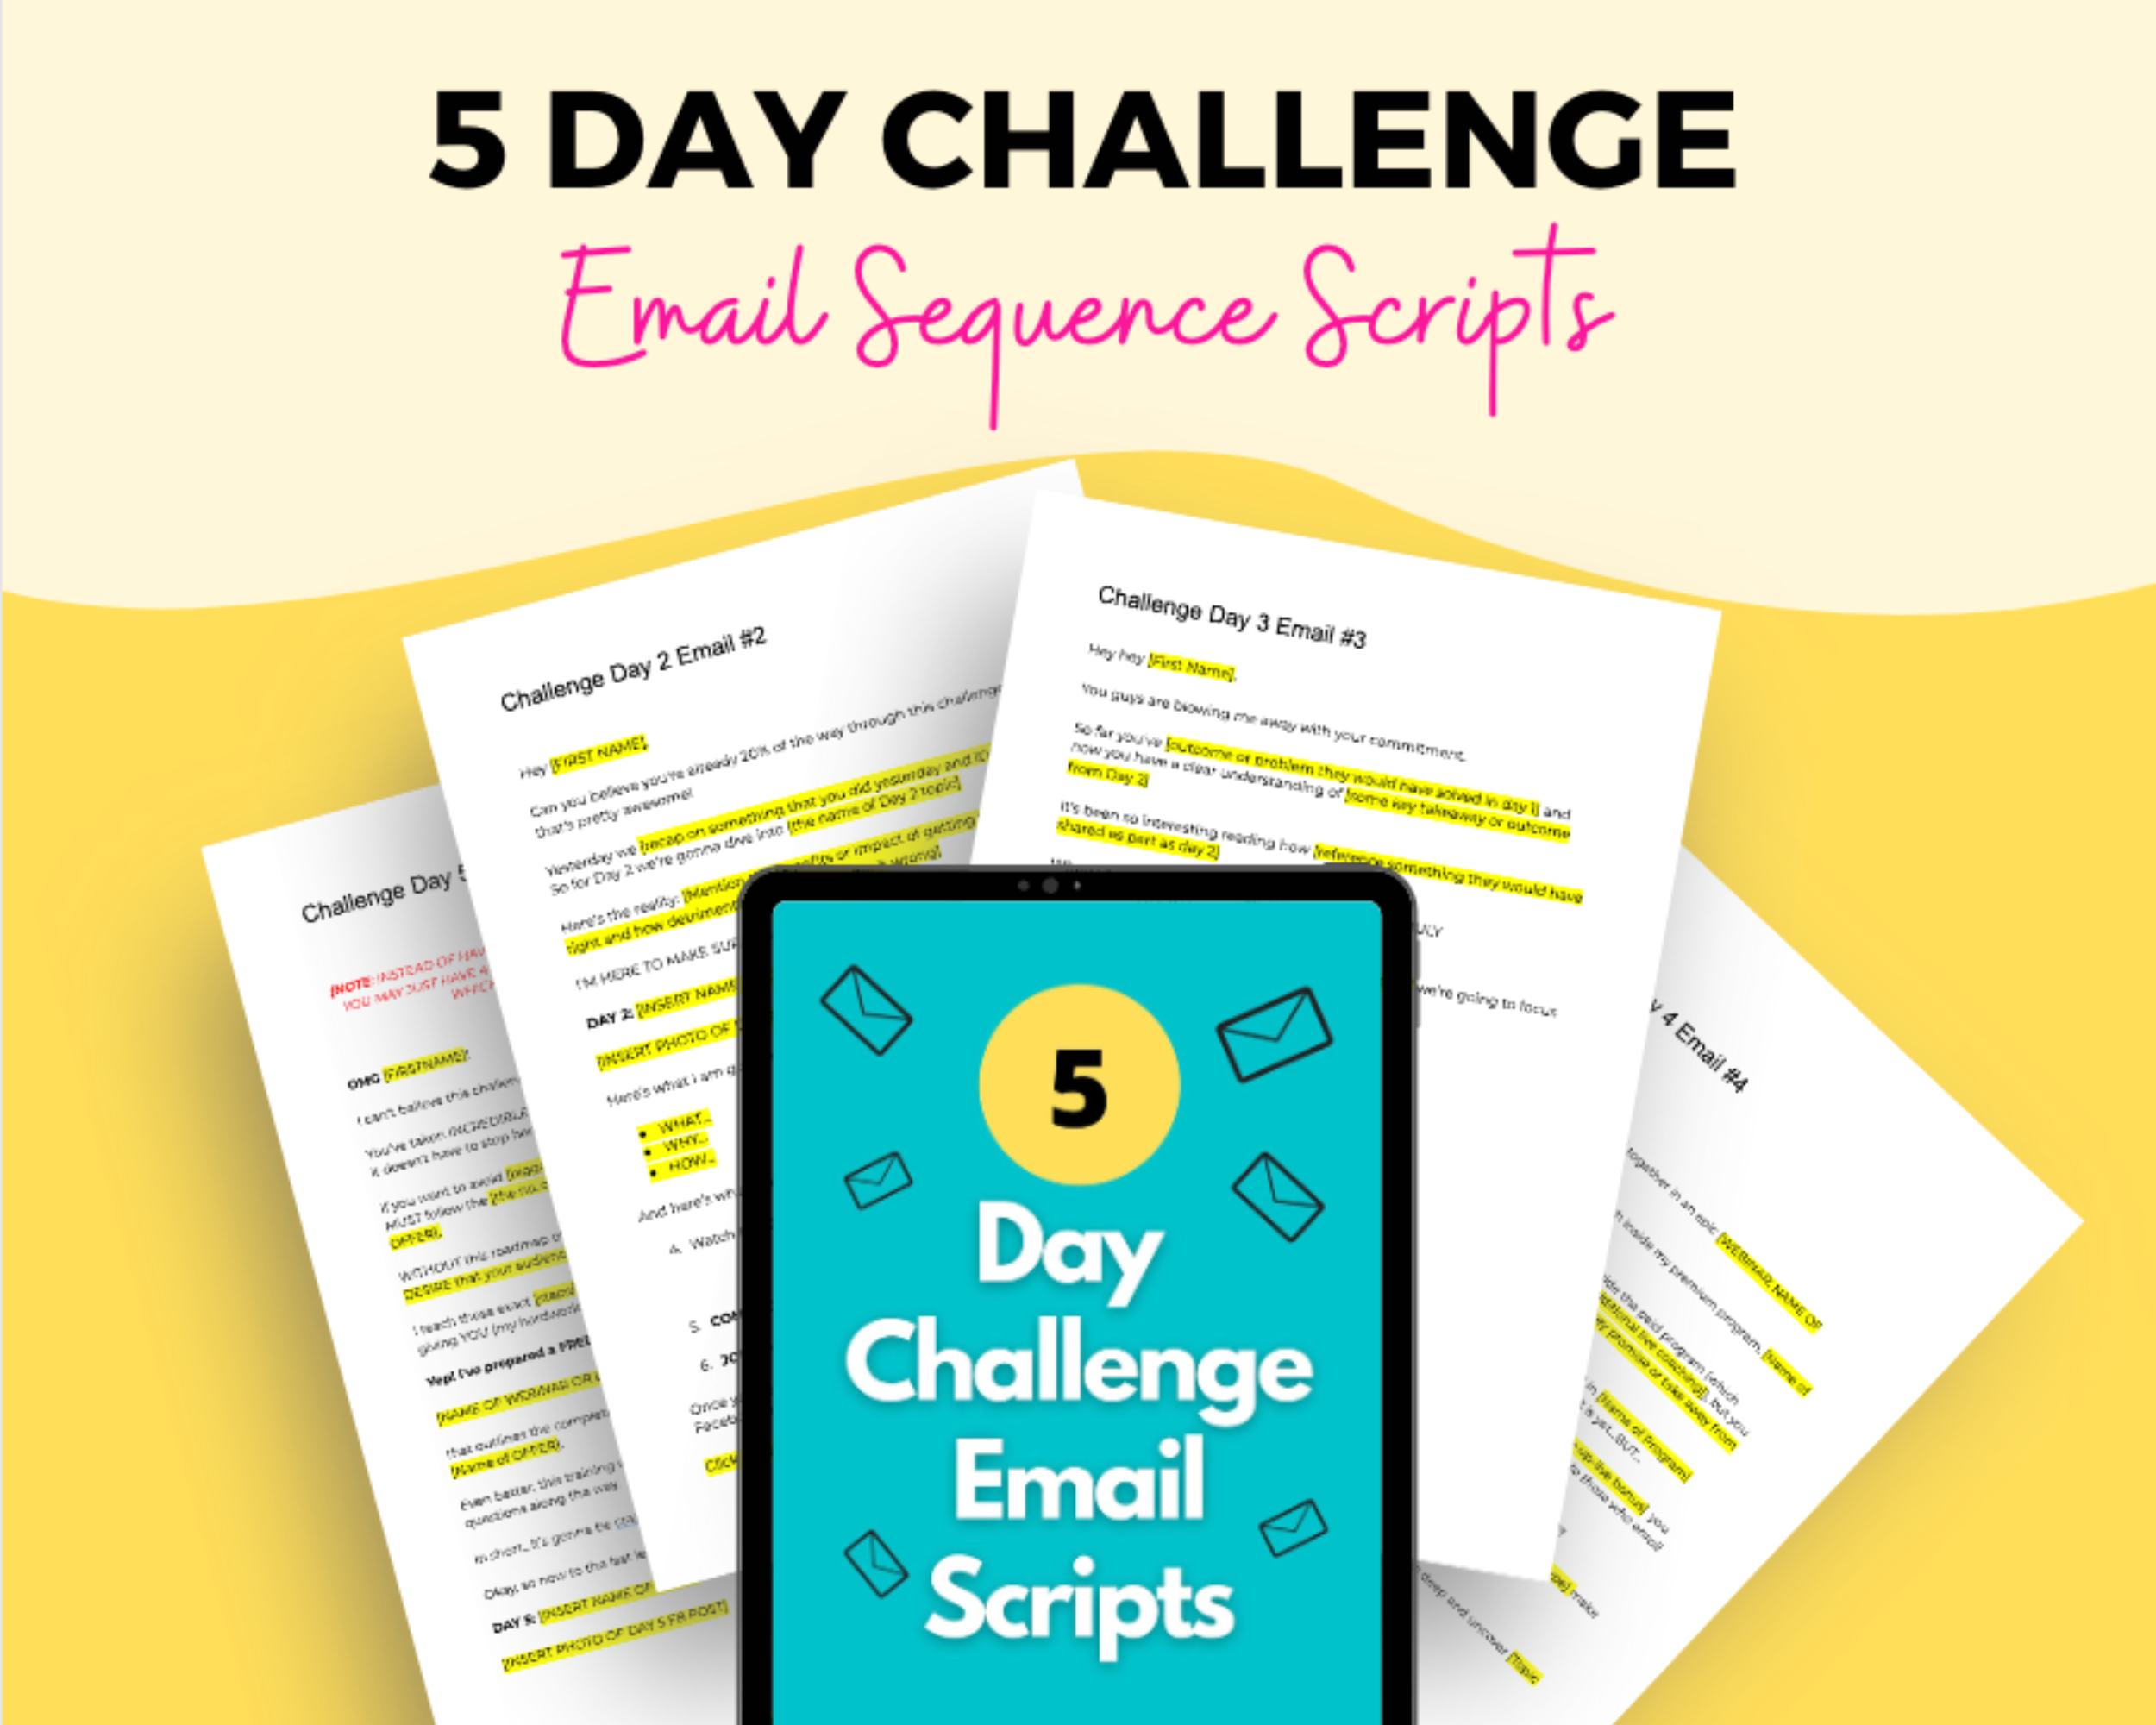 Email Scripts for 5 Day Challenge